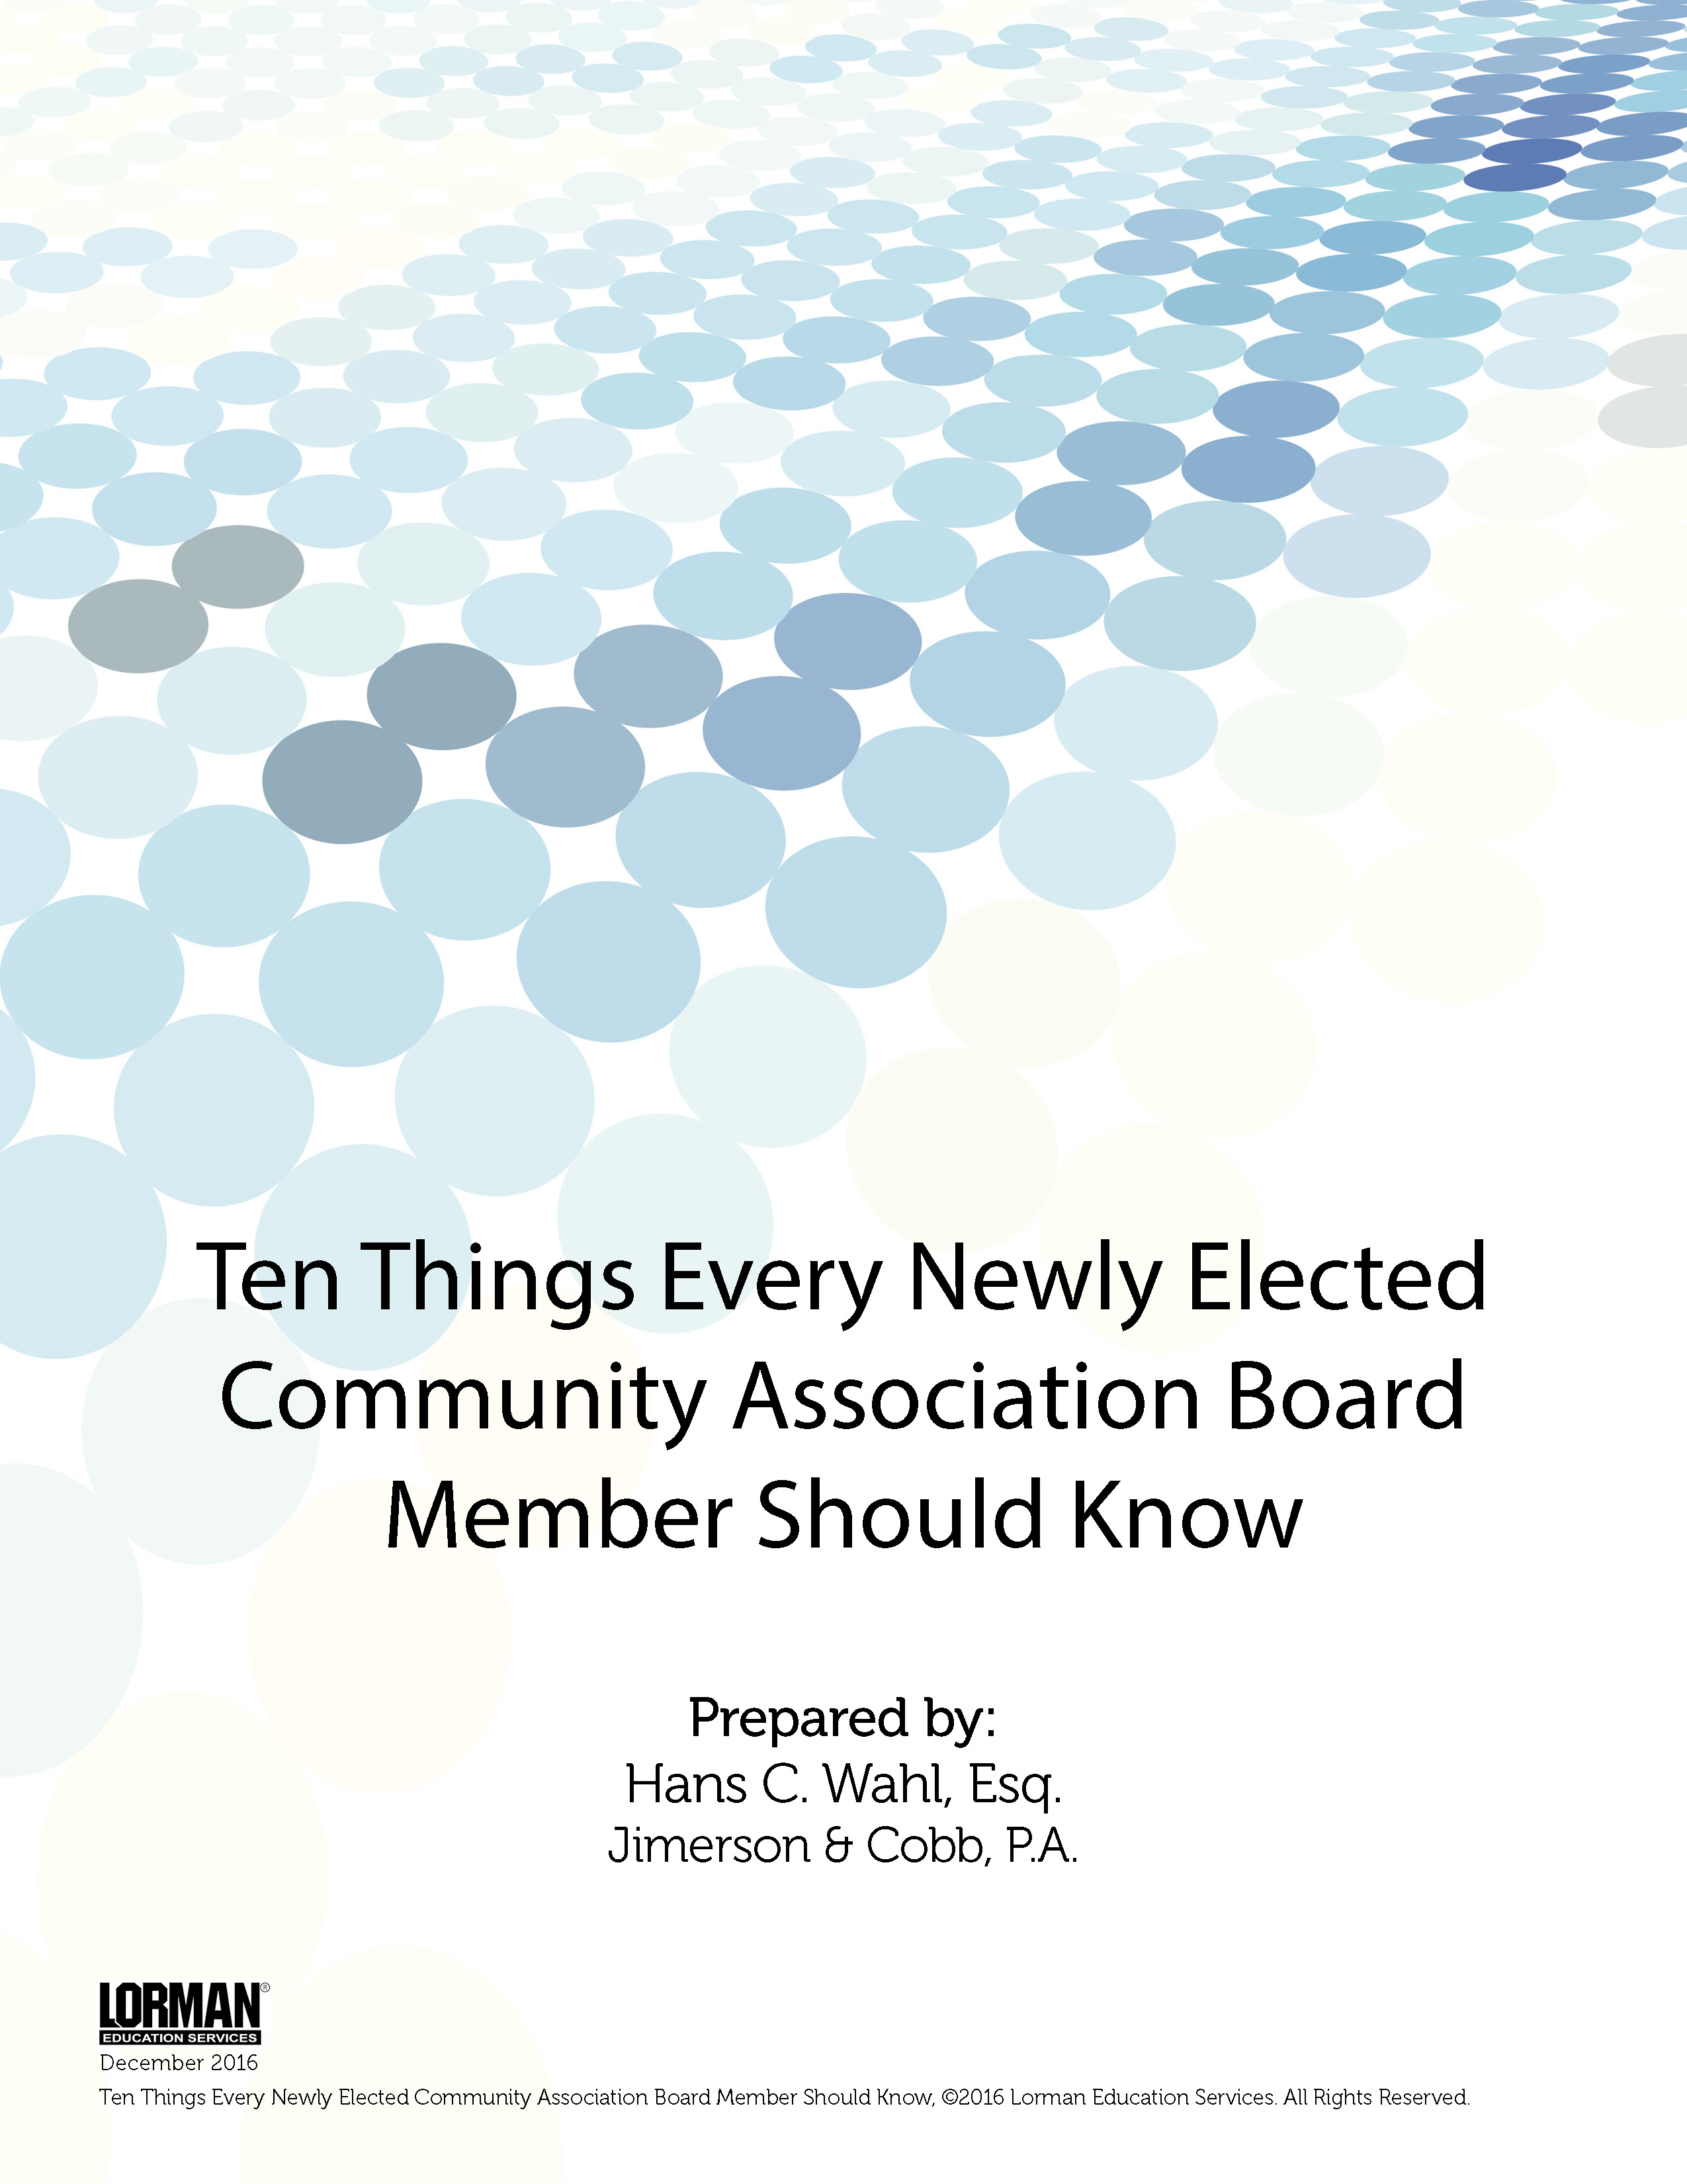 Ten Things Every Newly Elected Community Association Board Member Should Know